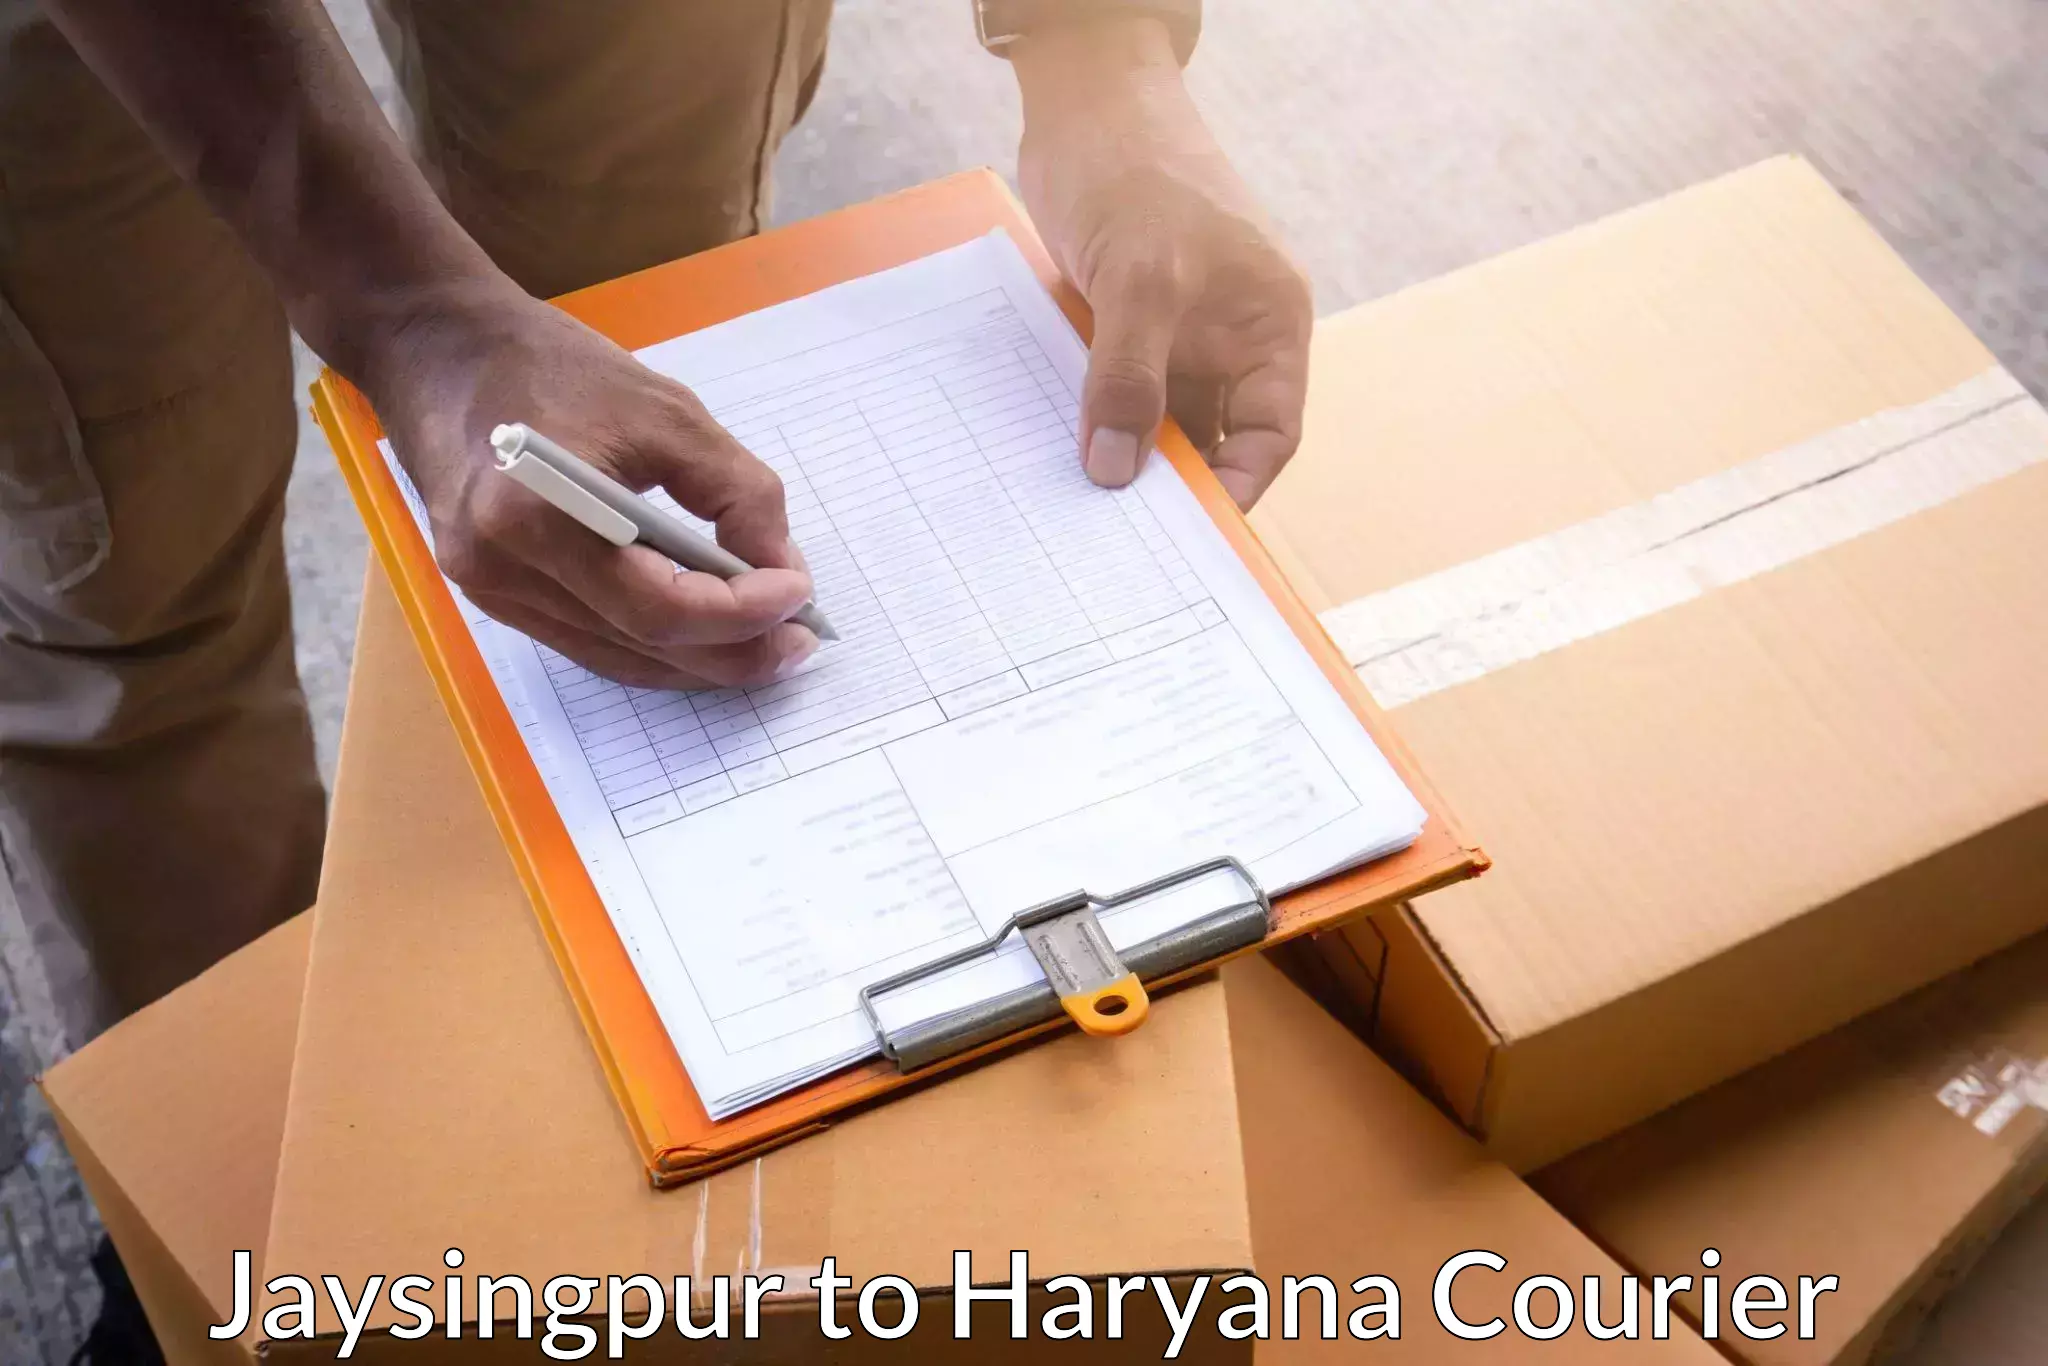 Full-service courier options Jaysingpur to Haryana